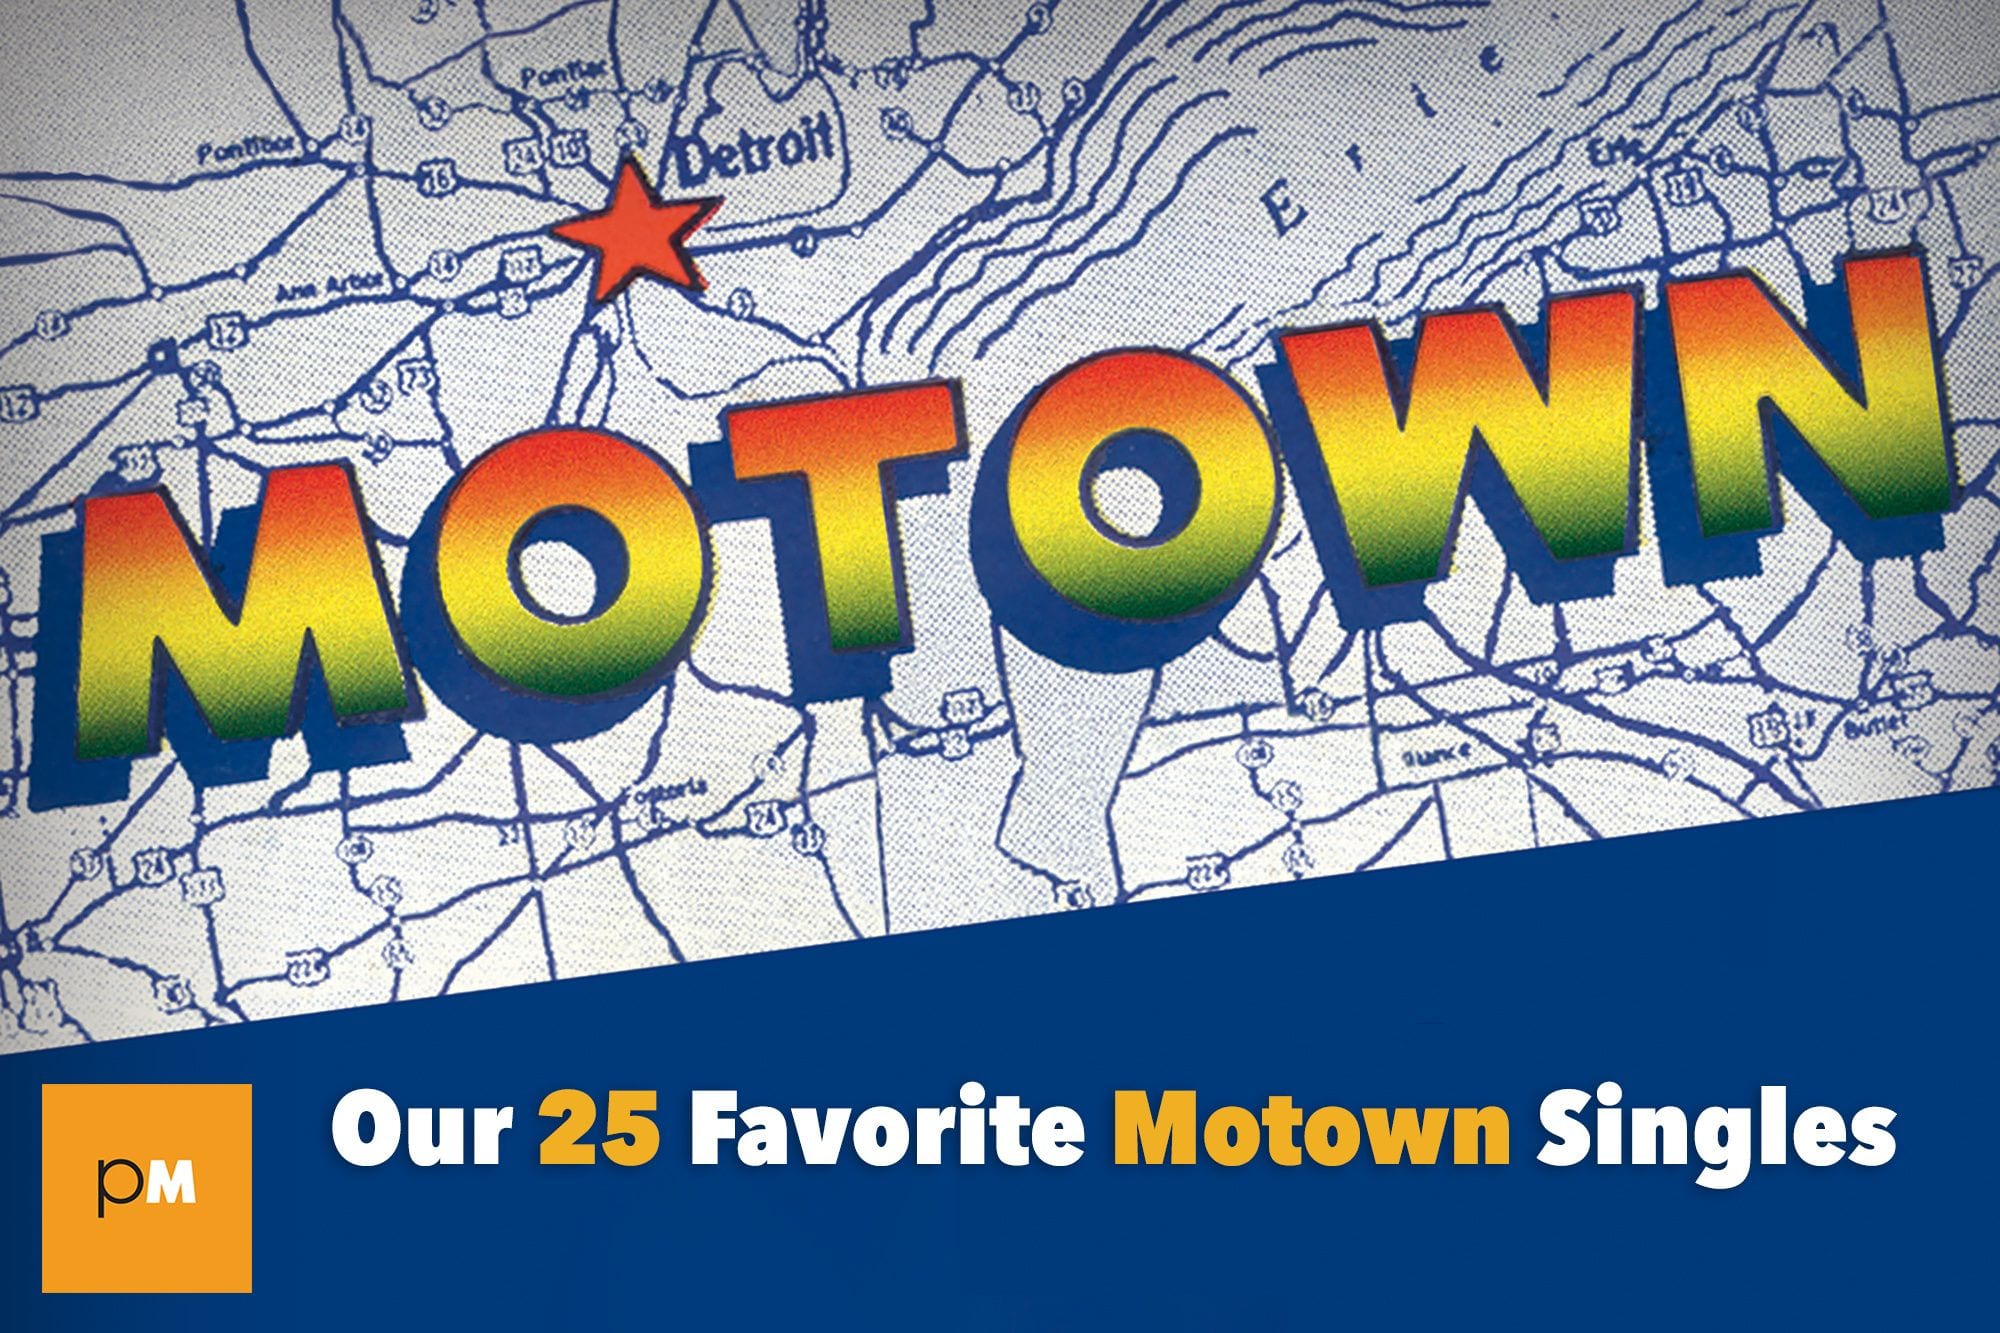 Dancing in the Street: Our 25 Favorite Motown Singles